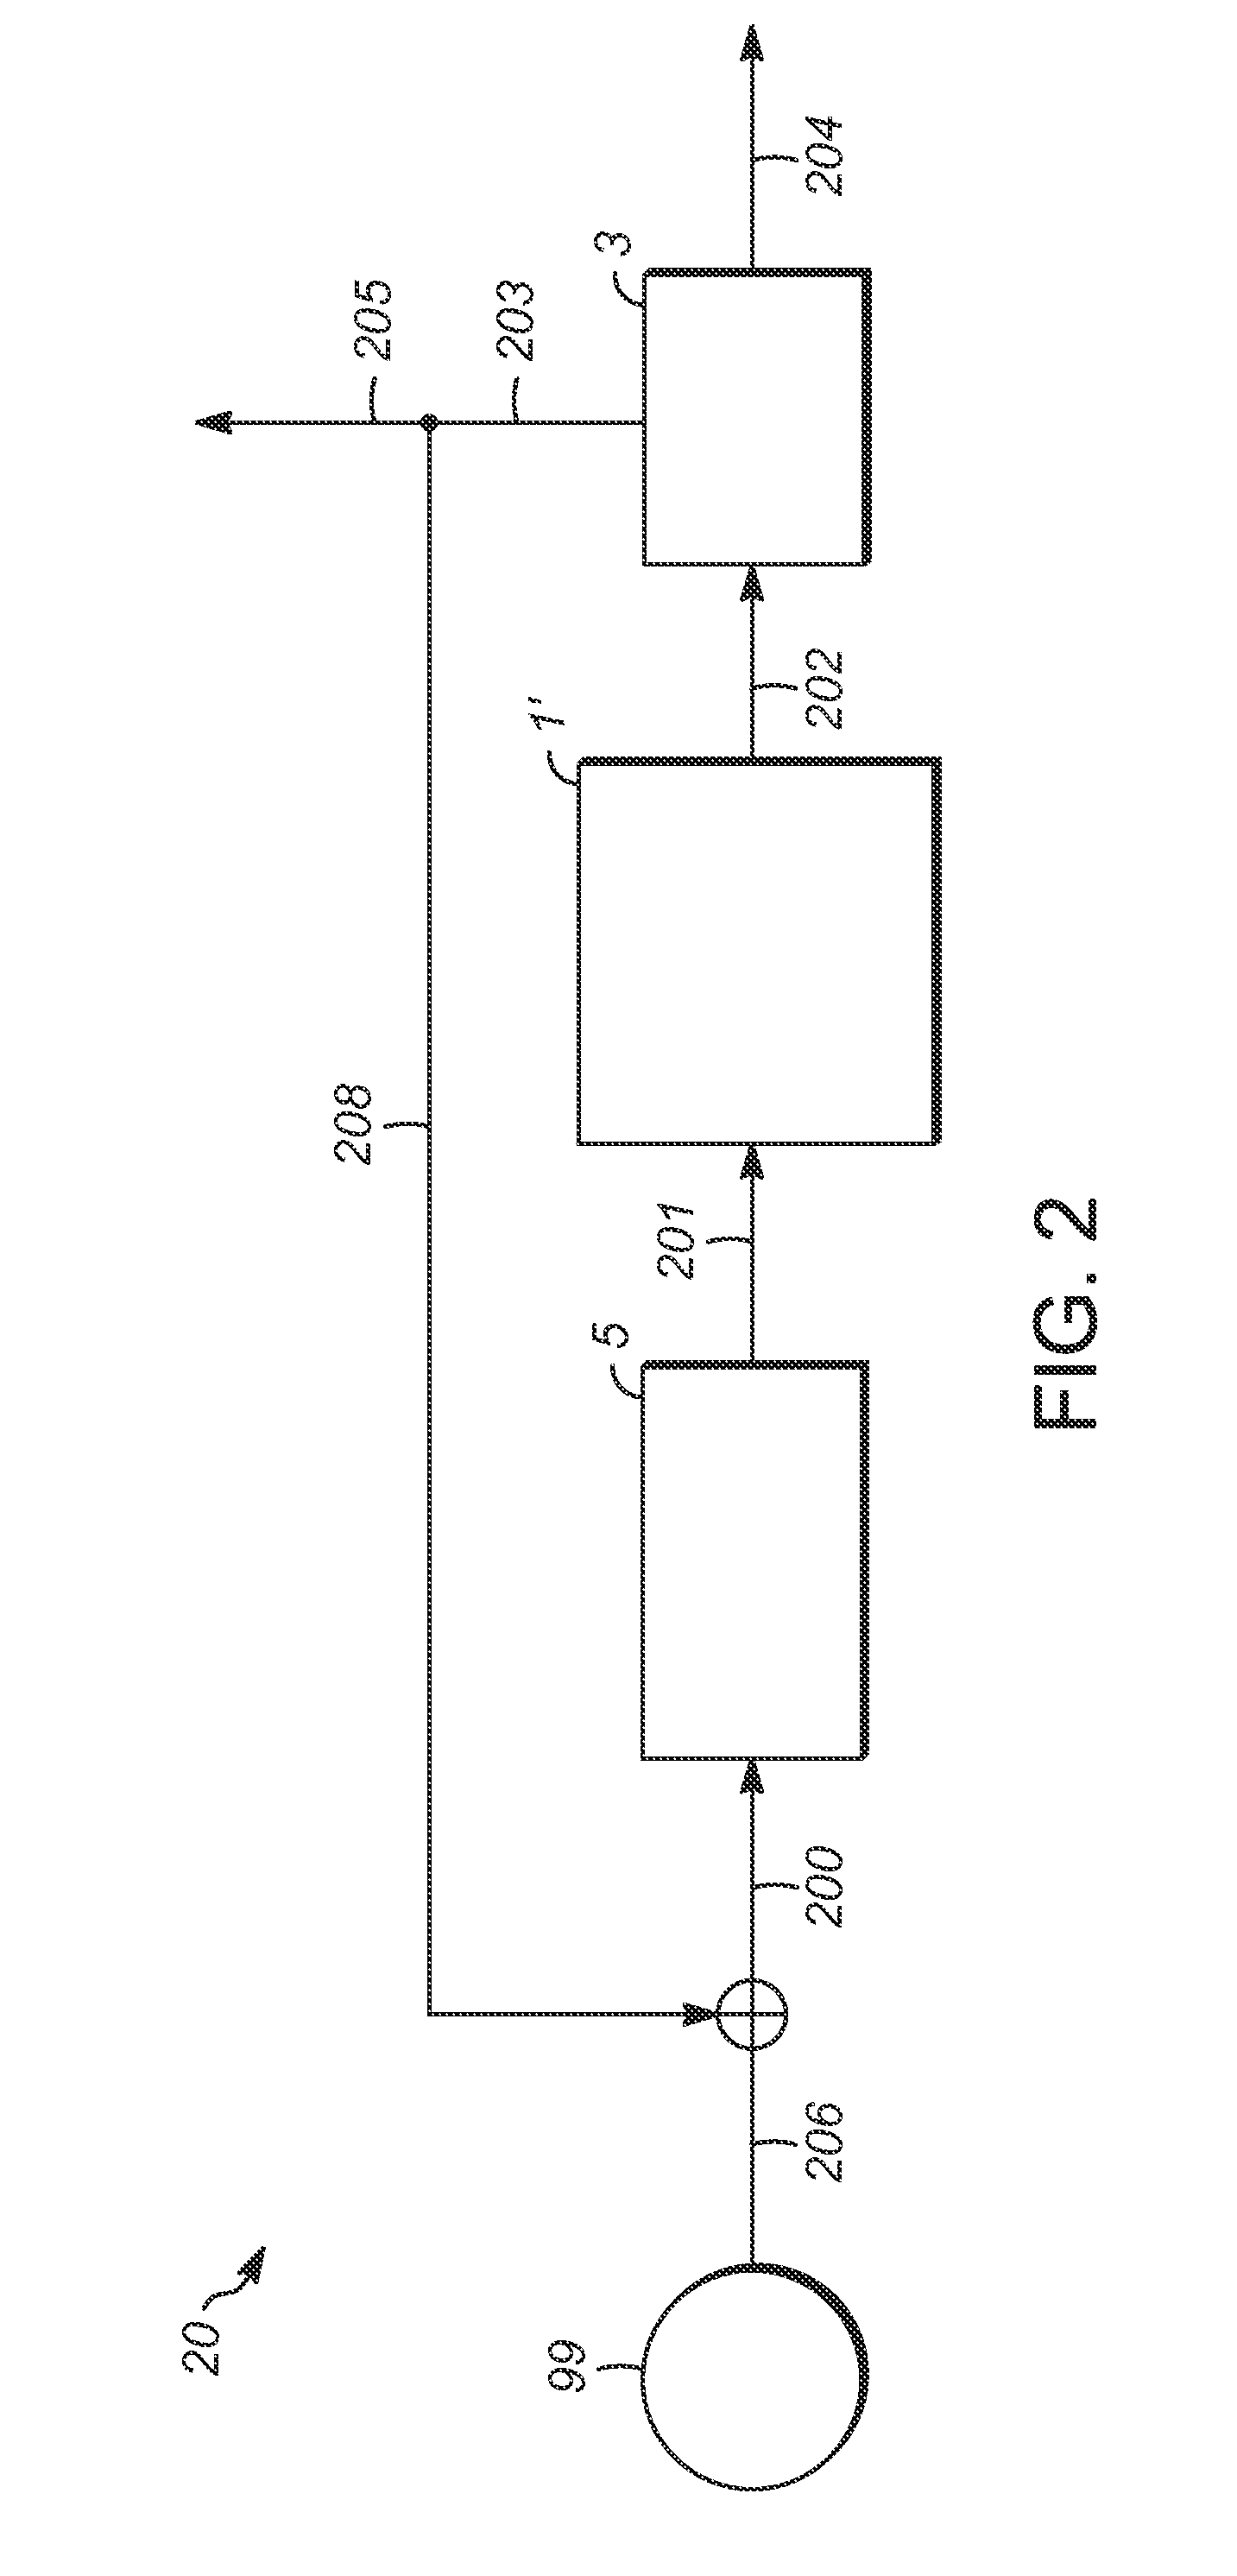 Methods for producing jet-range hydrocarbons